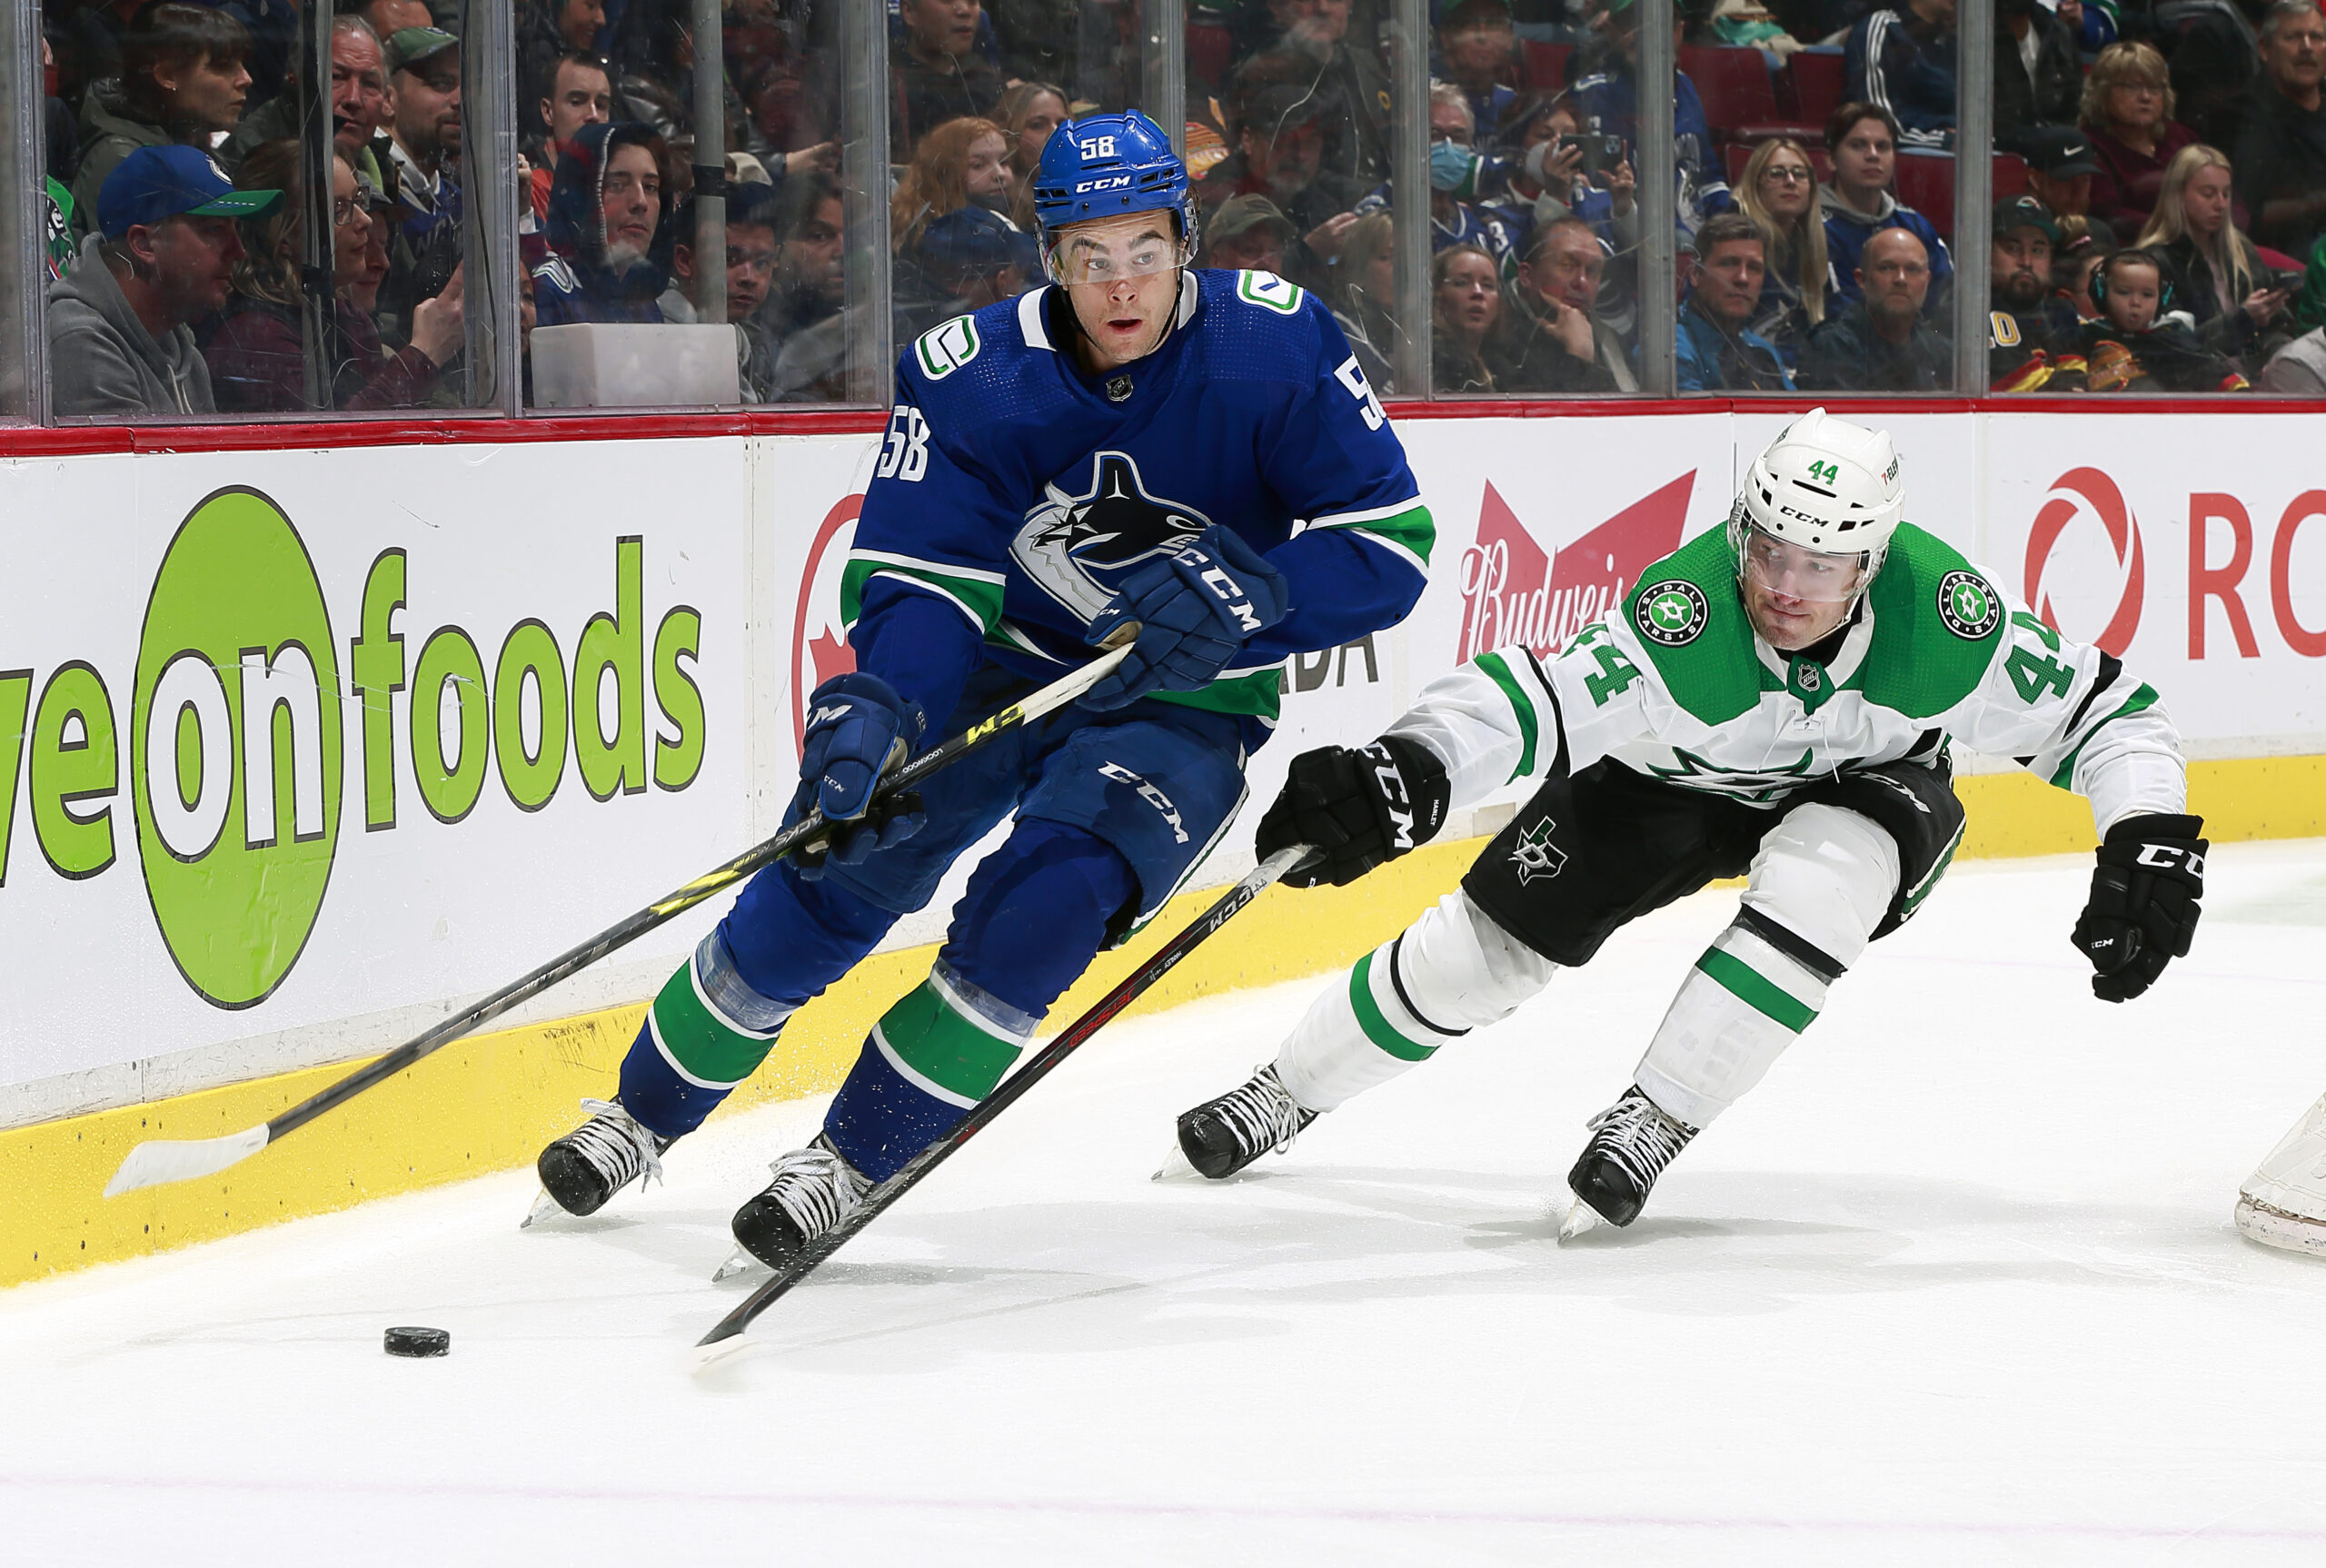 Vancouver Canucks announce 10 more skate jersey game nights - CanucksArmy